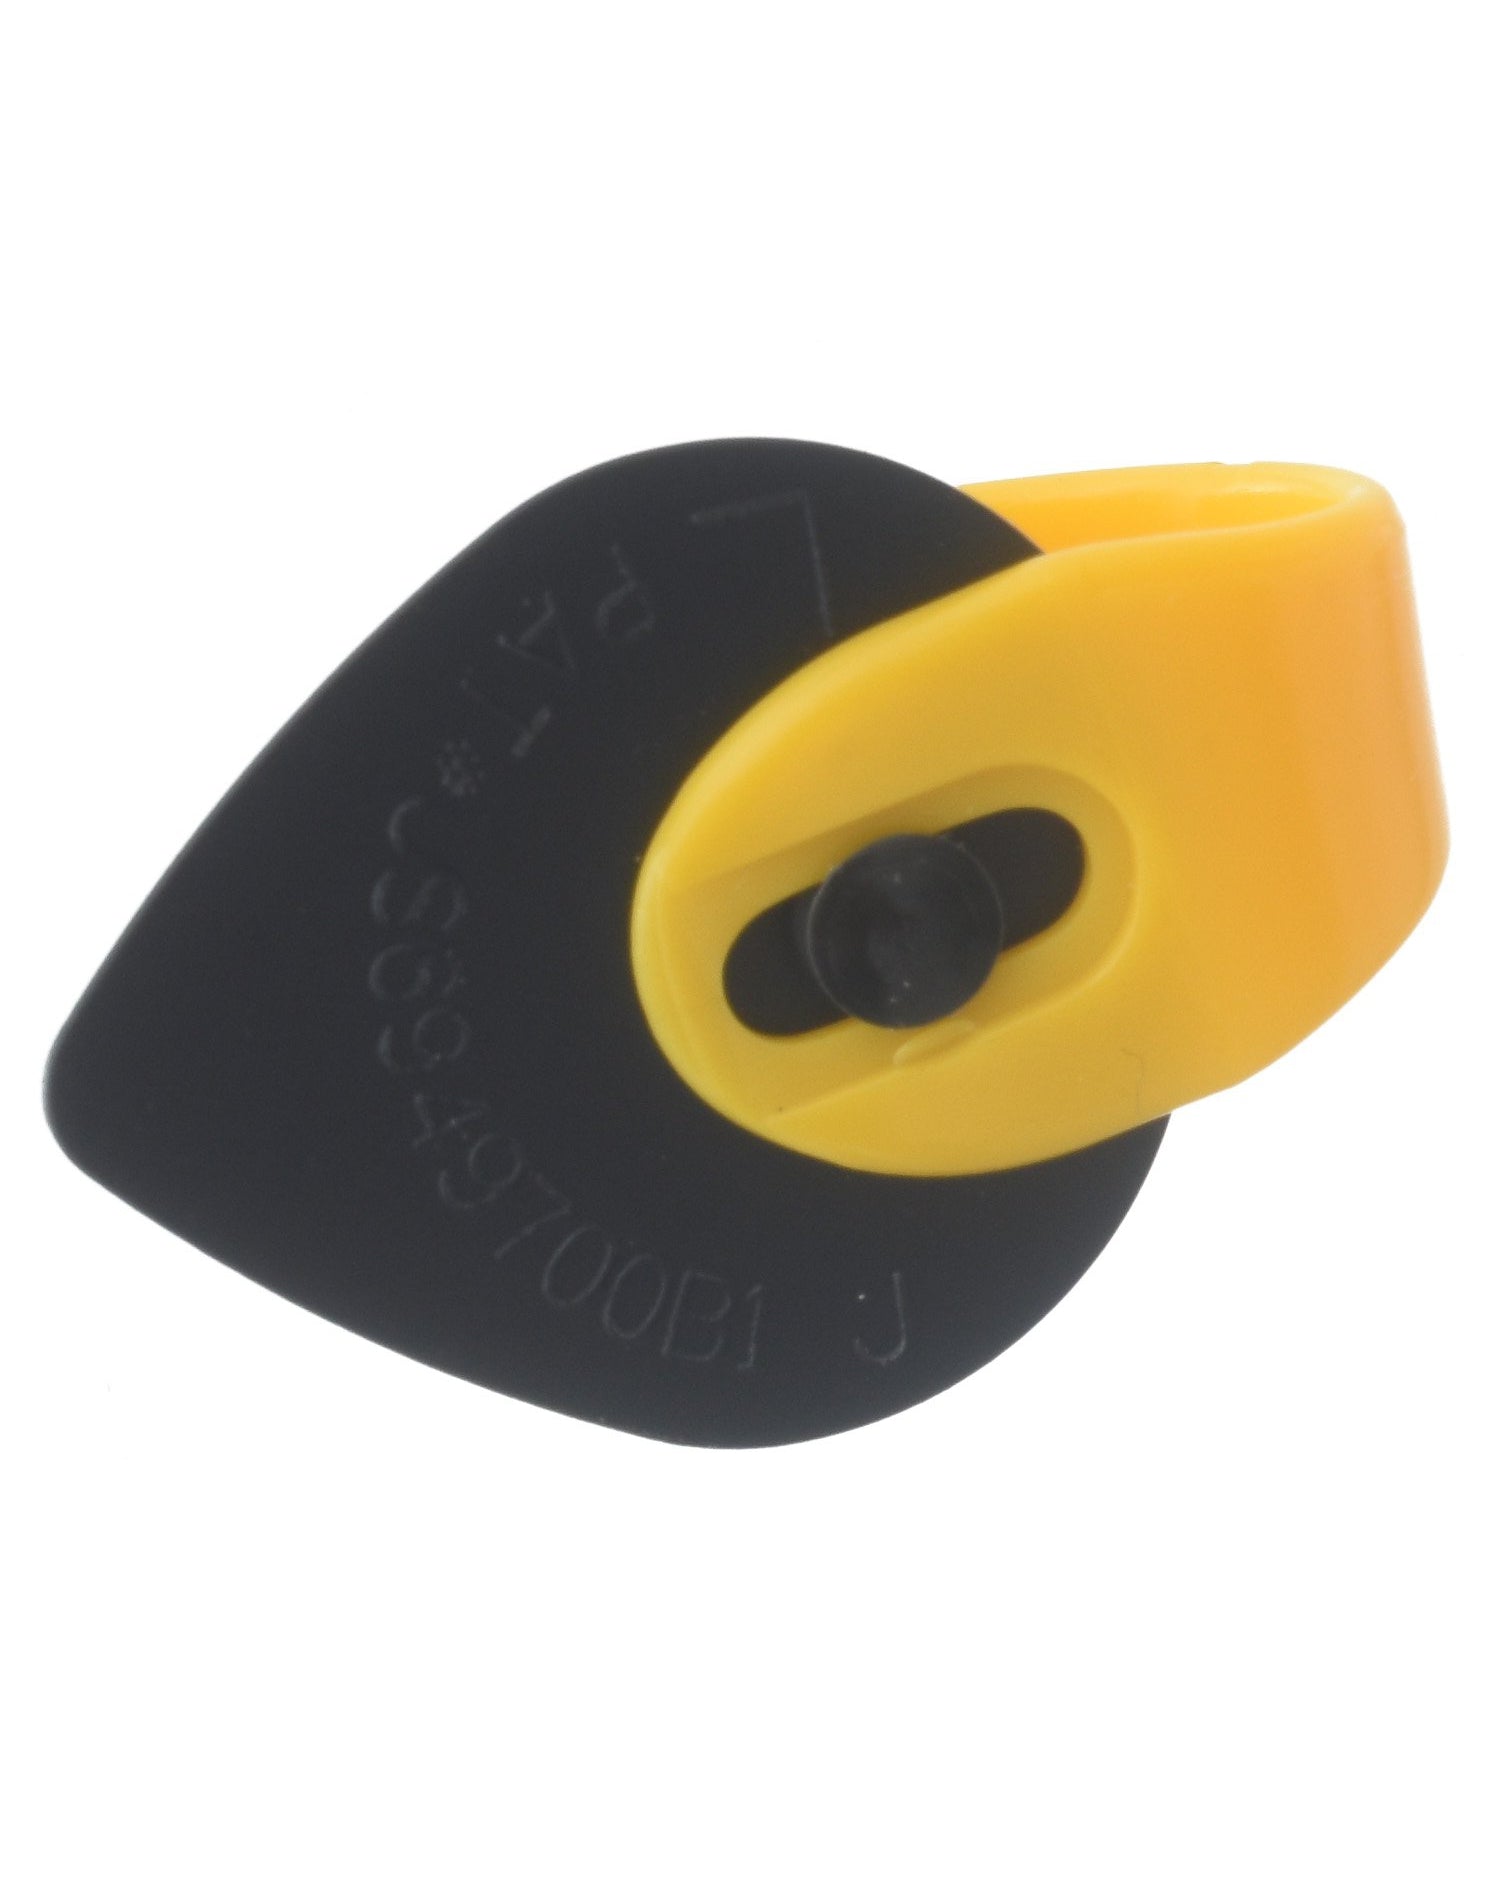 Image 1 of Fred Kelly Delrin Extra-Heavy Gauge Bumble Bee Jazz Pick - SKU# PKBBJ-XH : Product Type Accessories & Parts : Elderly Instruments